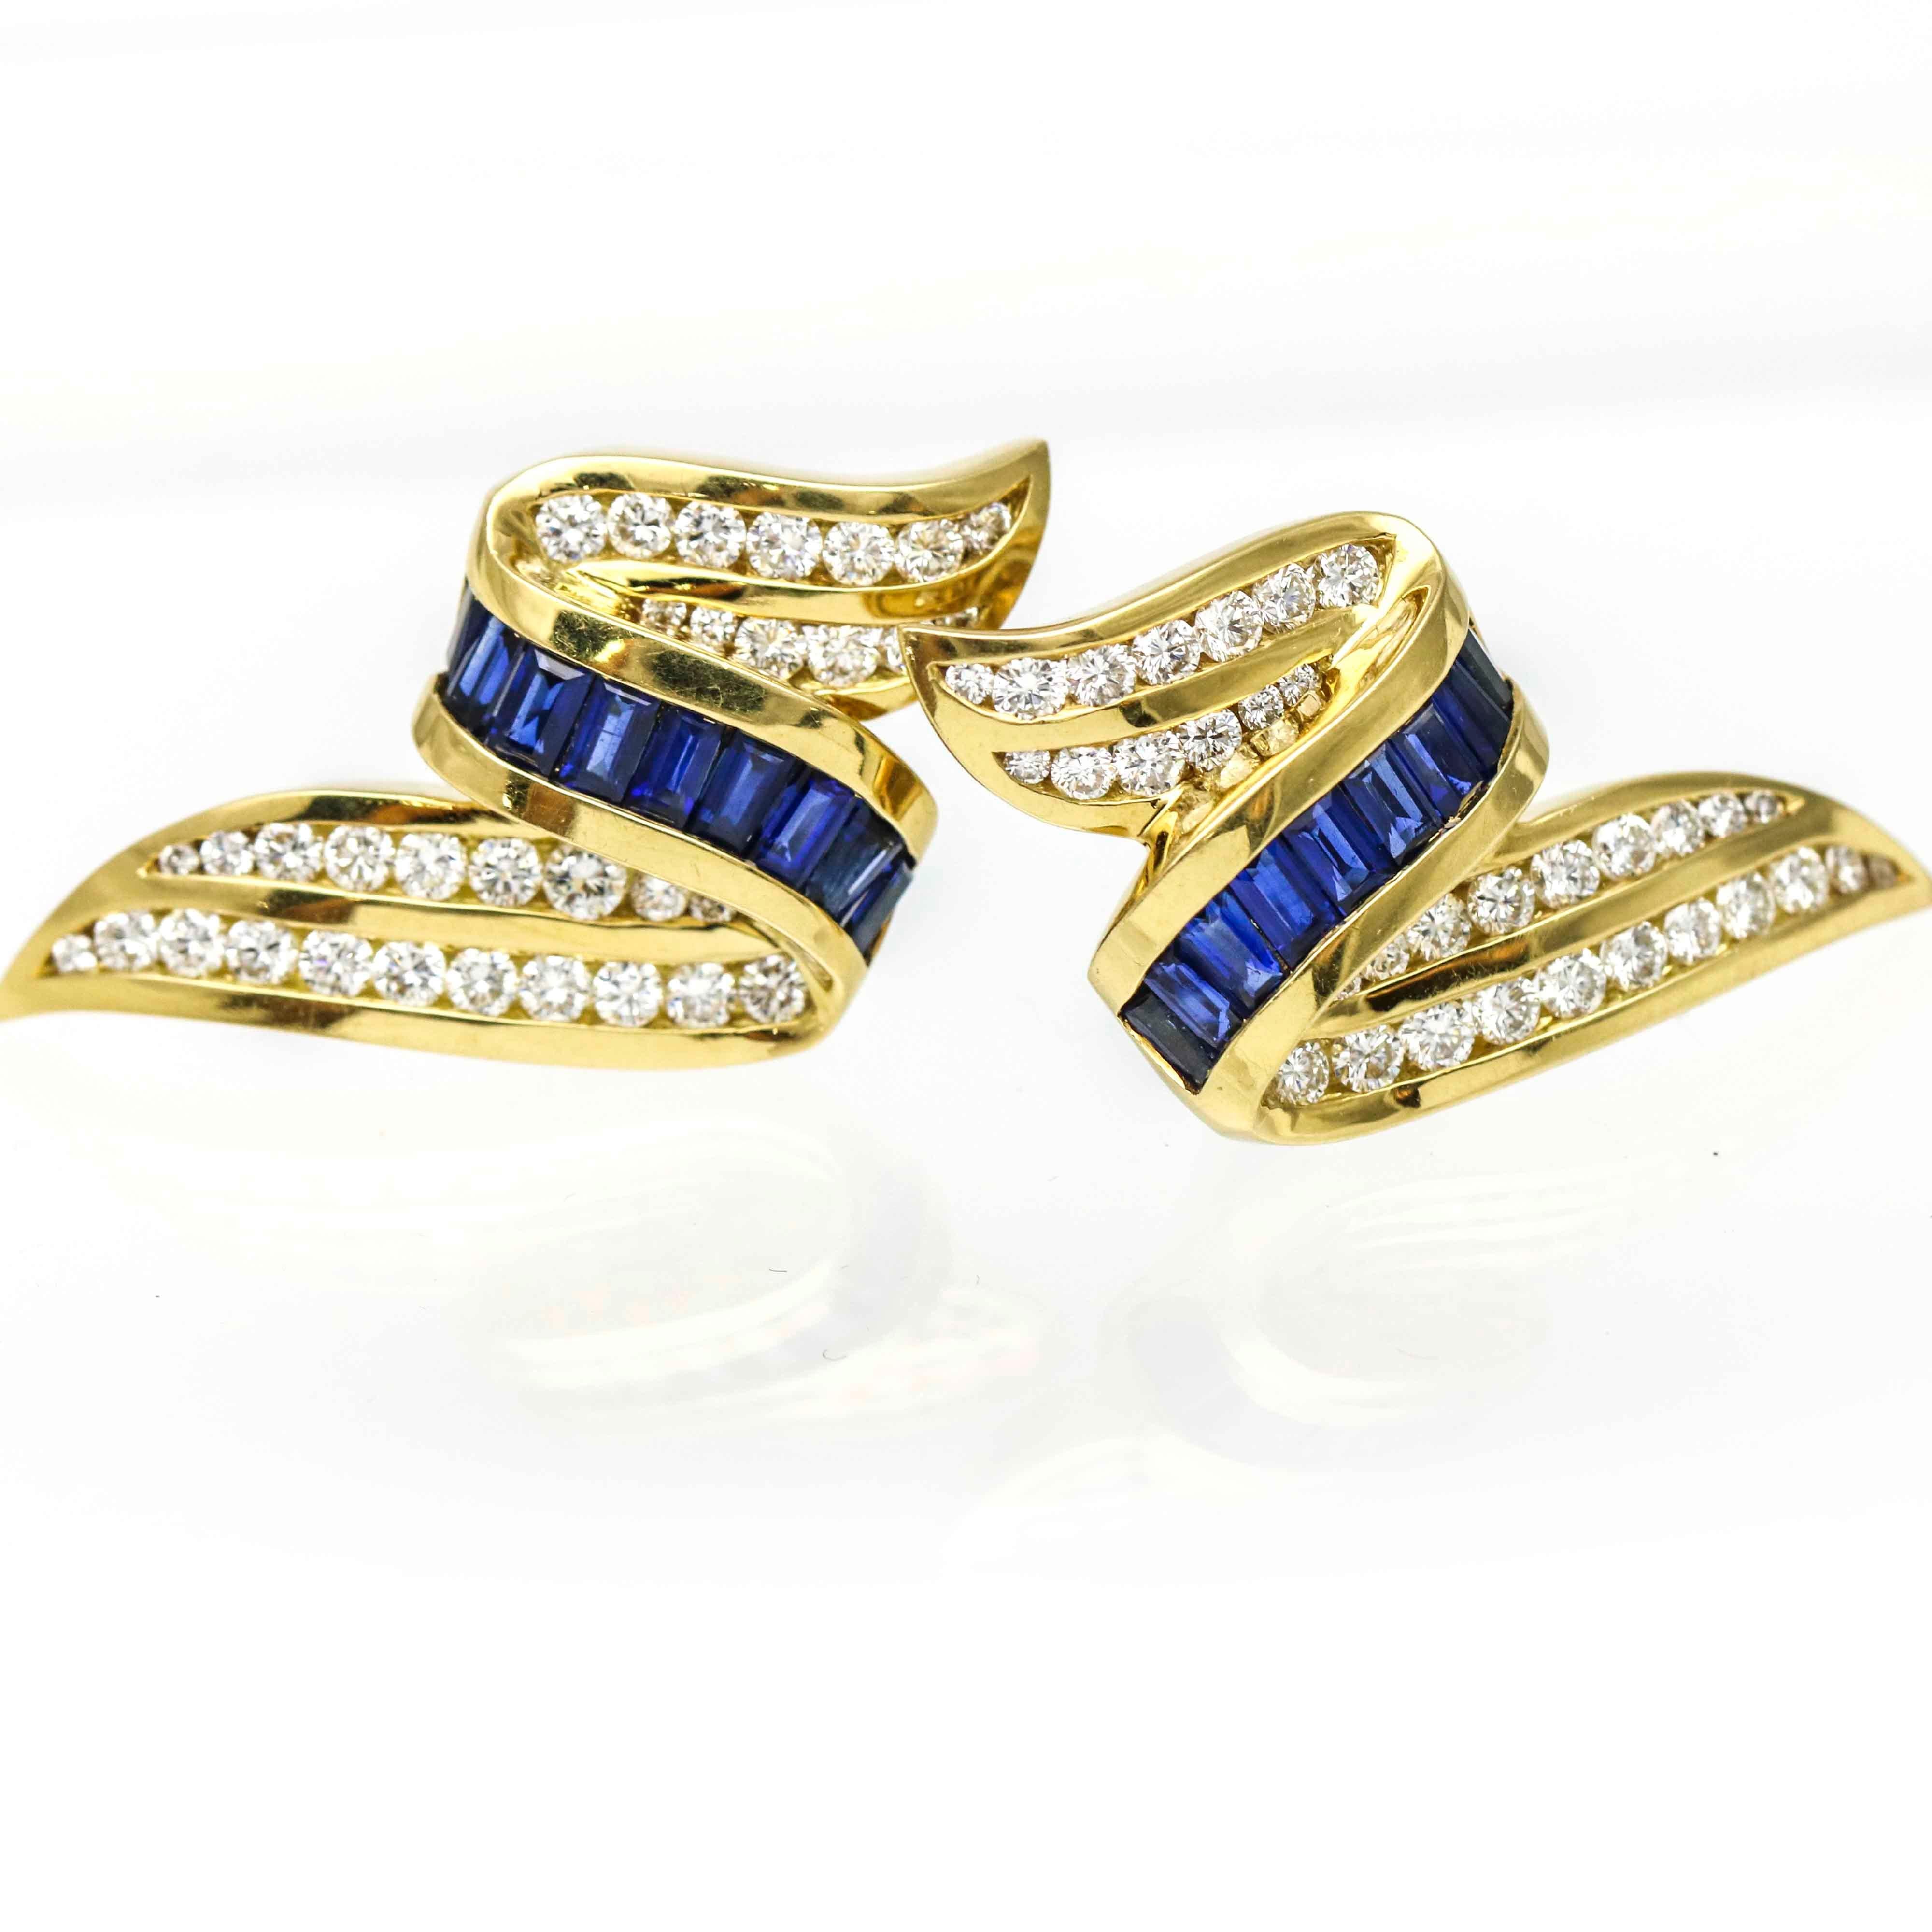 Retro Charles Krypell Sapphire and Diamond 18 Karat Yellow Gold Clip-On Earrings For Sale